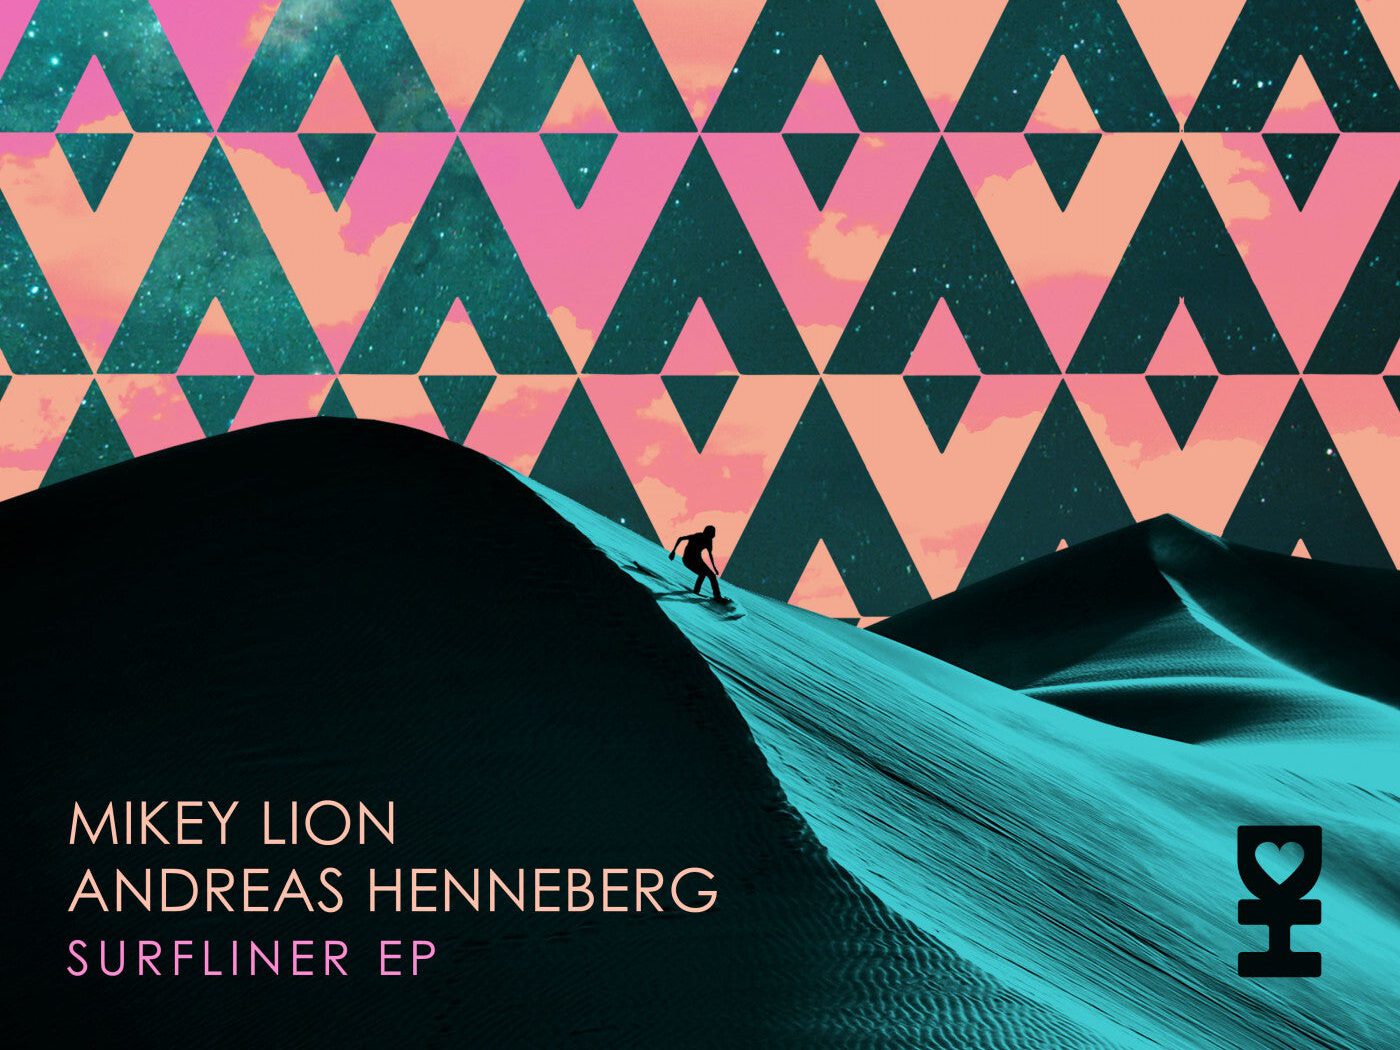 Mikey Lion Andreas Henneberg - Surfliner EP